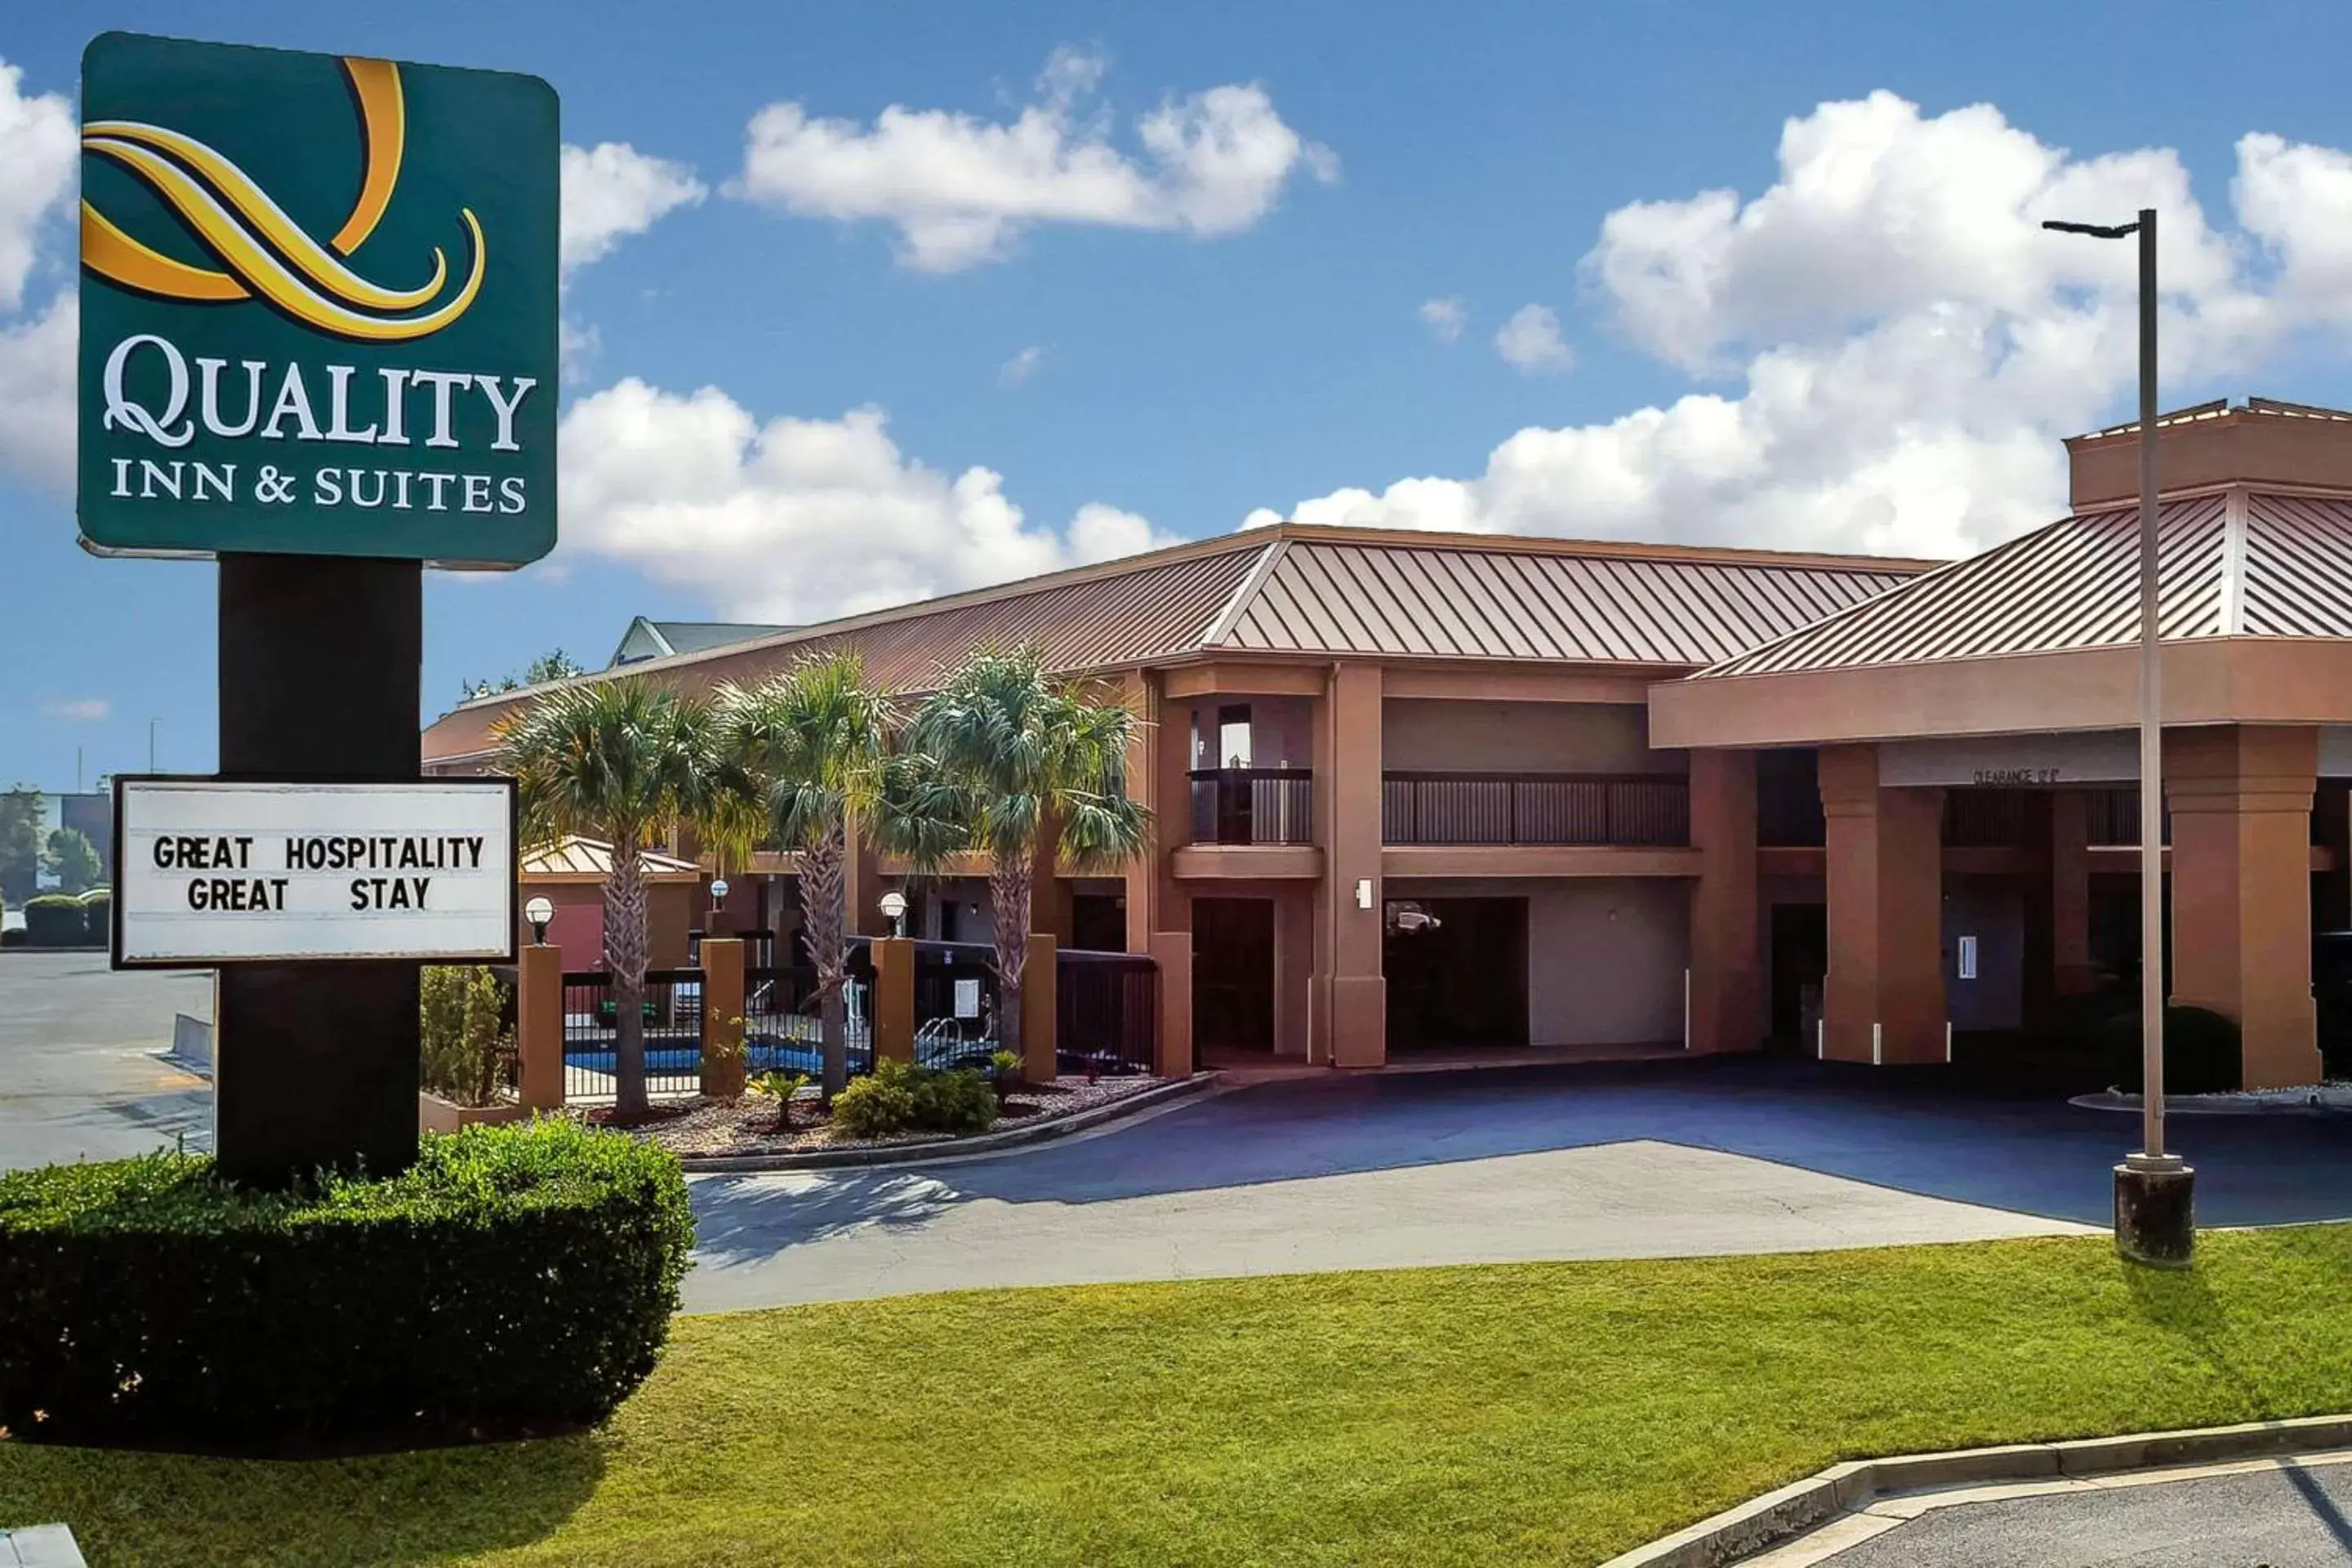 Property building in Quality Inn & Suites near Robins Air Force Base